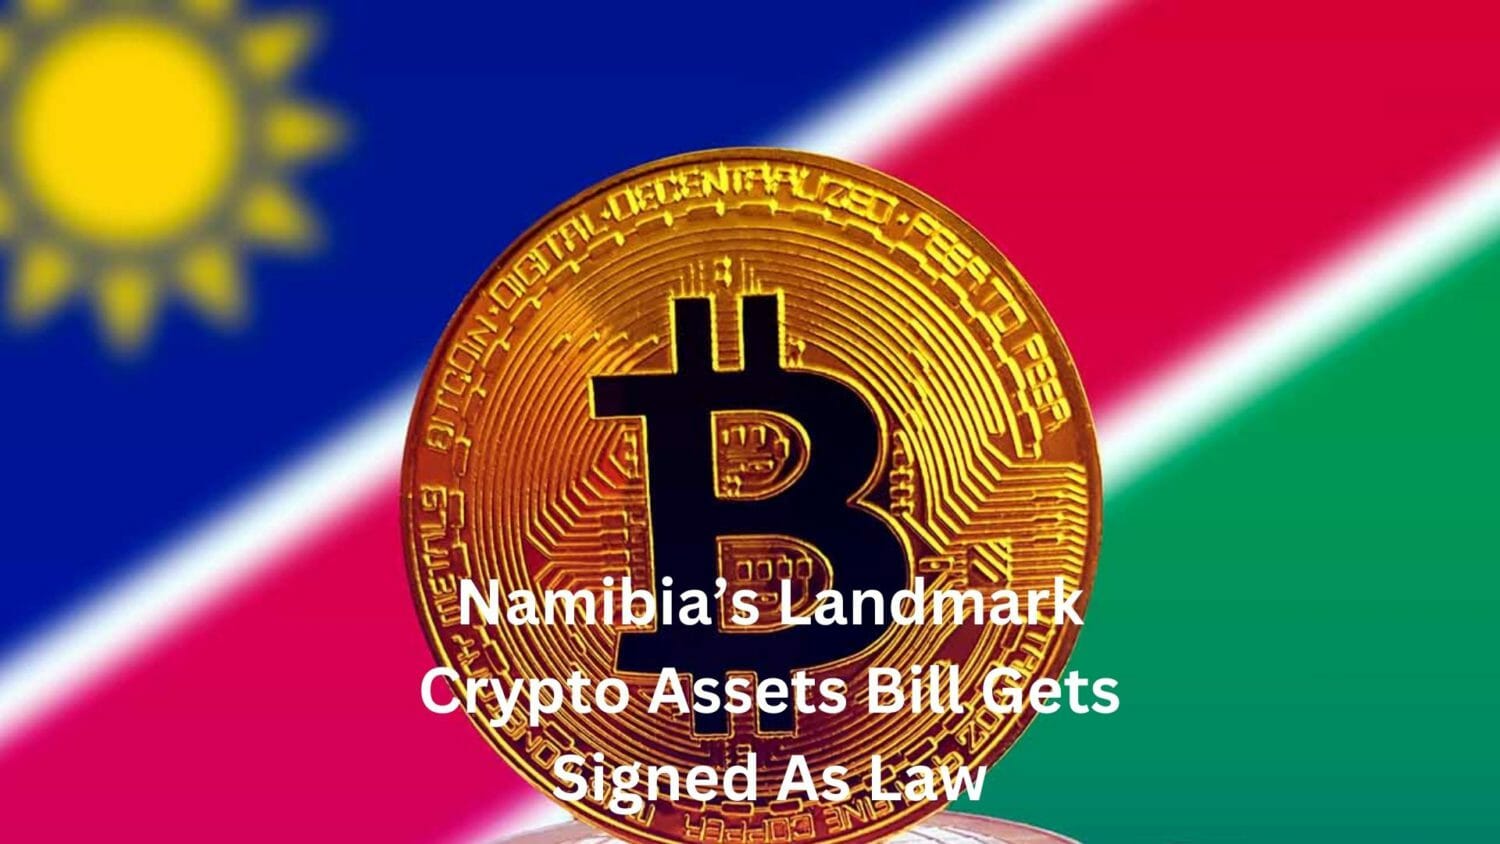 Namibia’s Landmark Crypto Assets Bill Gets Signed As Law